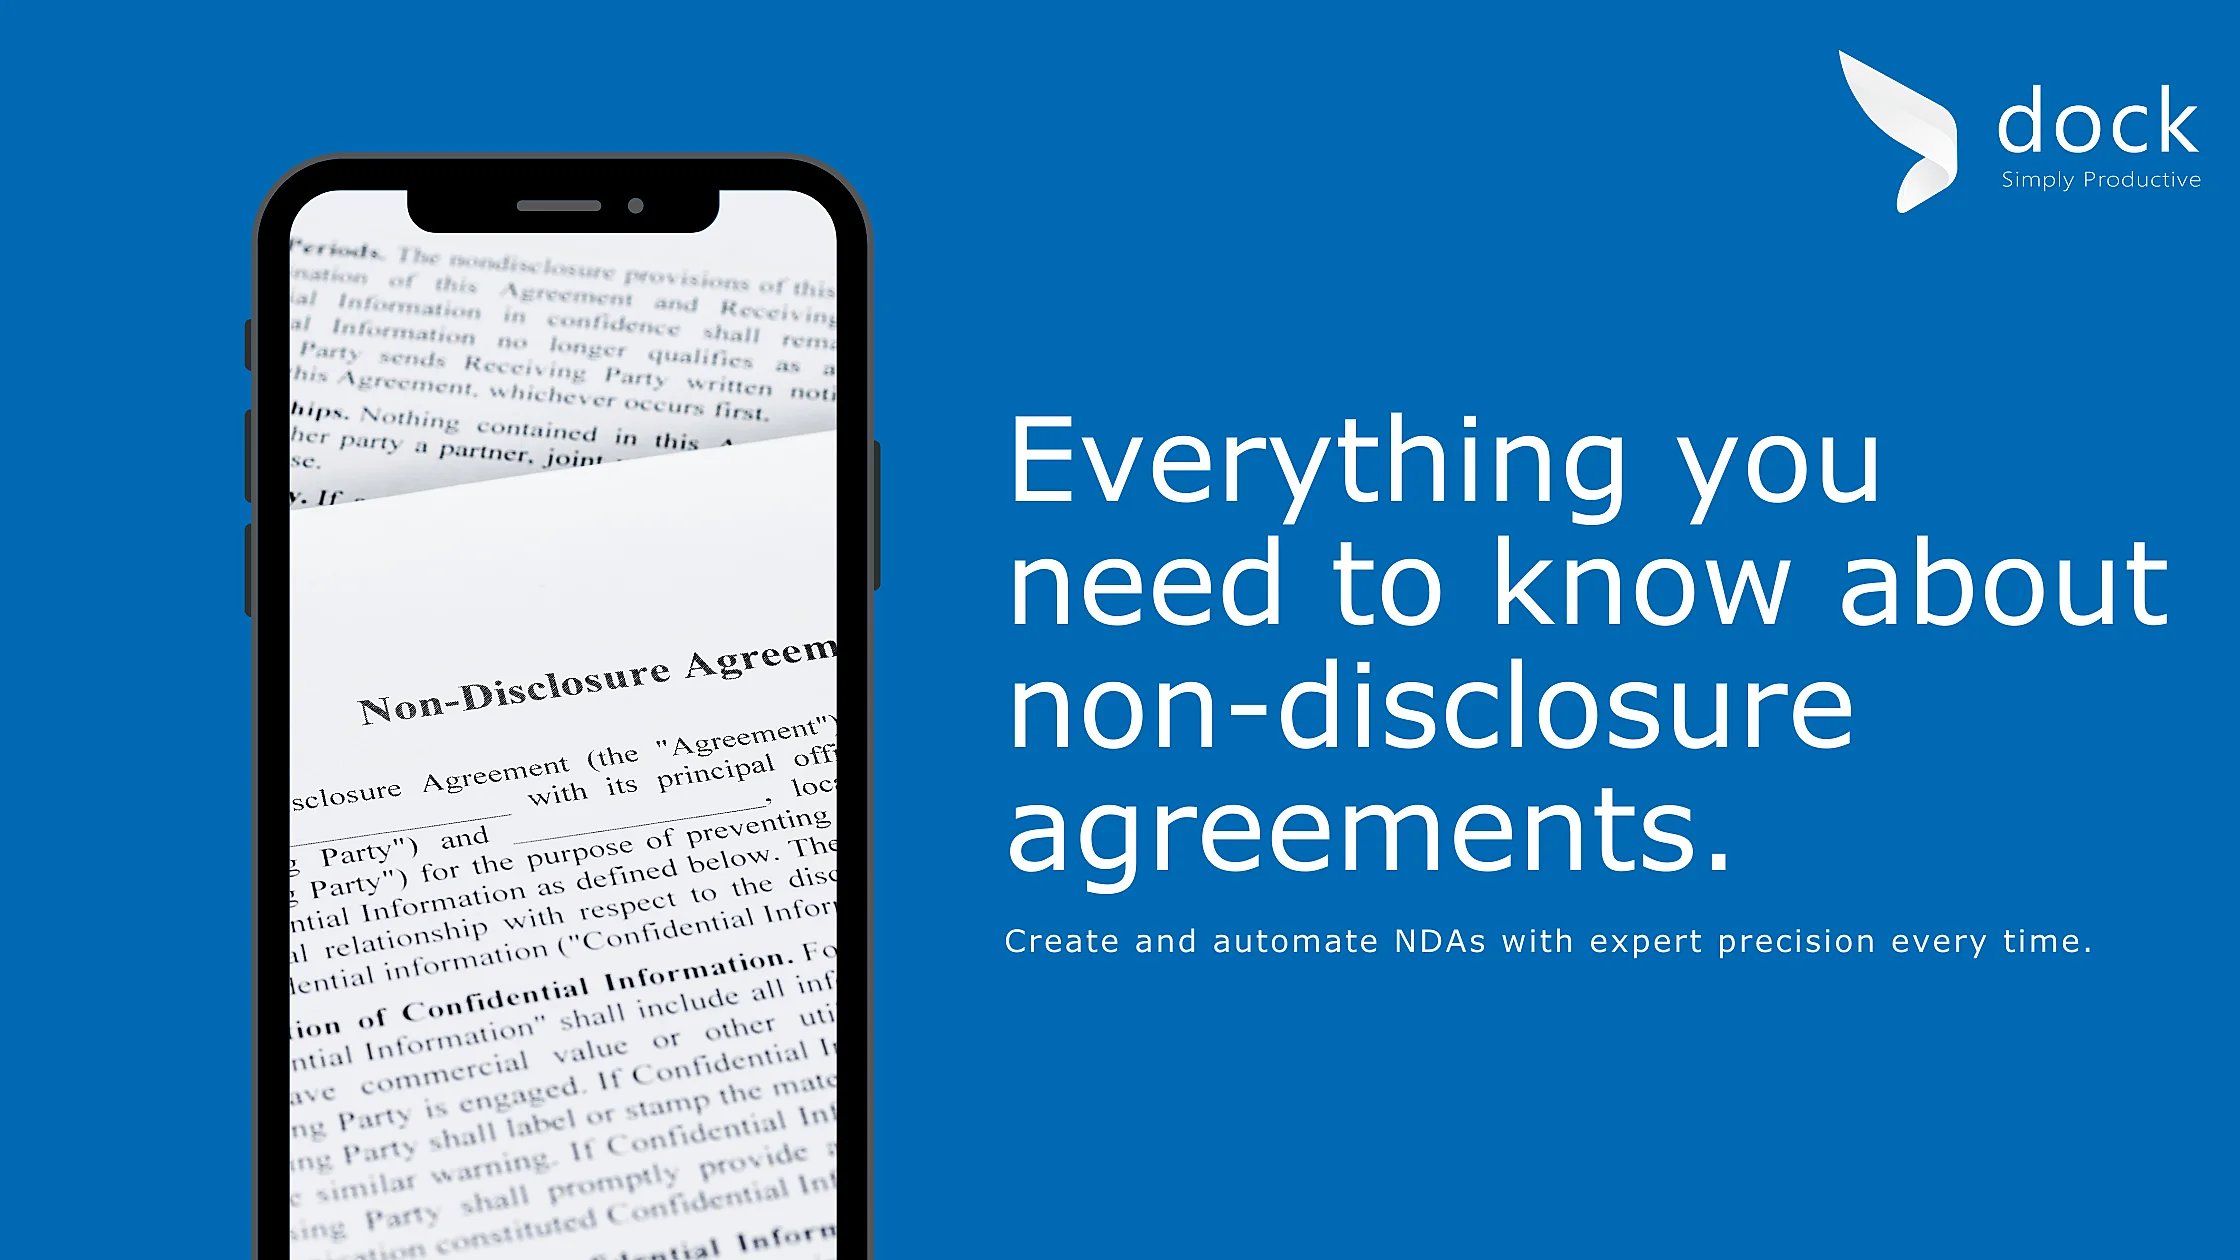 Everything you need to know about non-disclosure agreements.